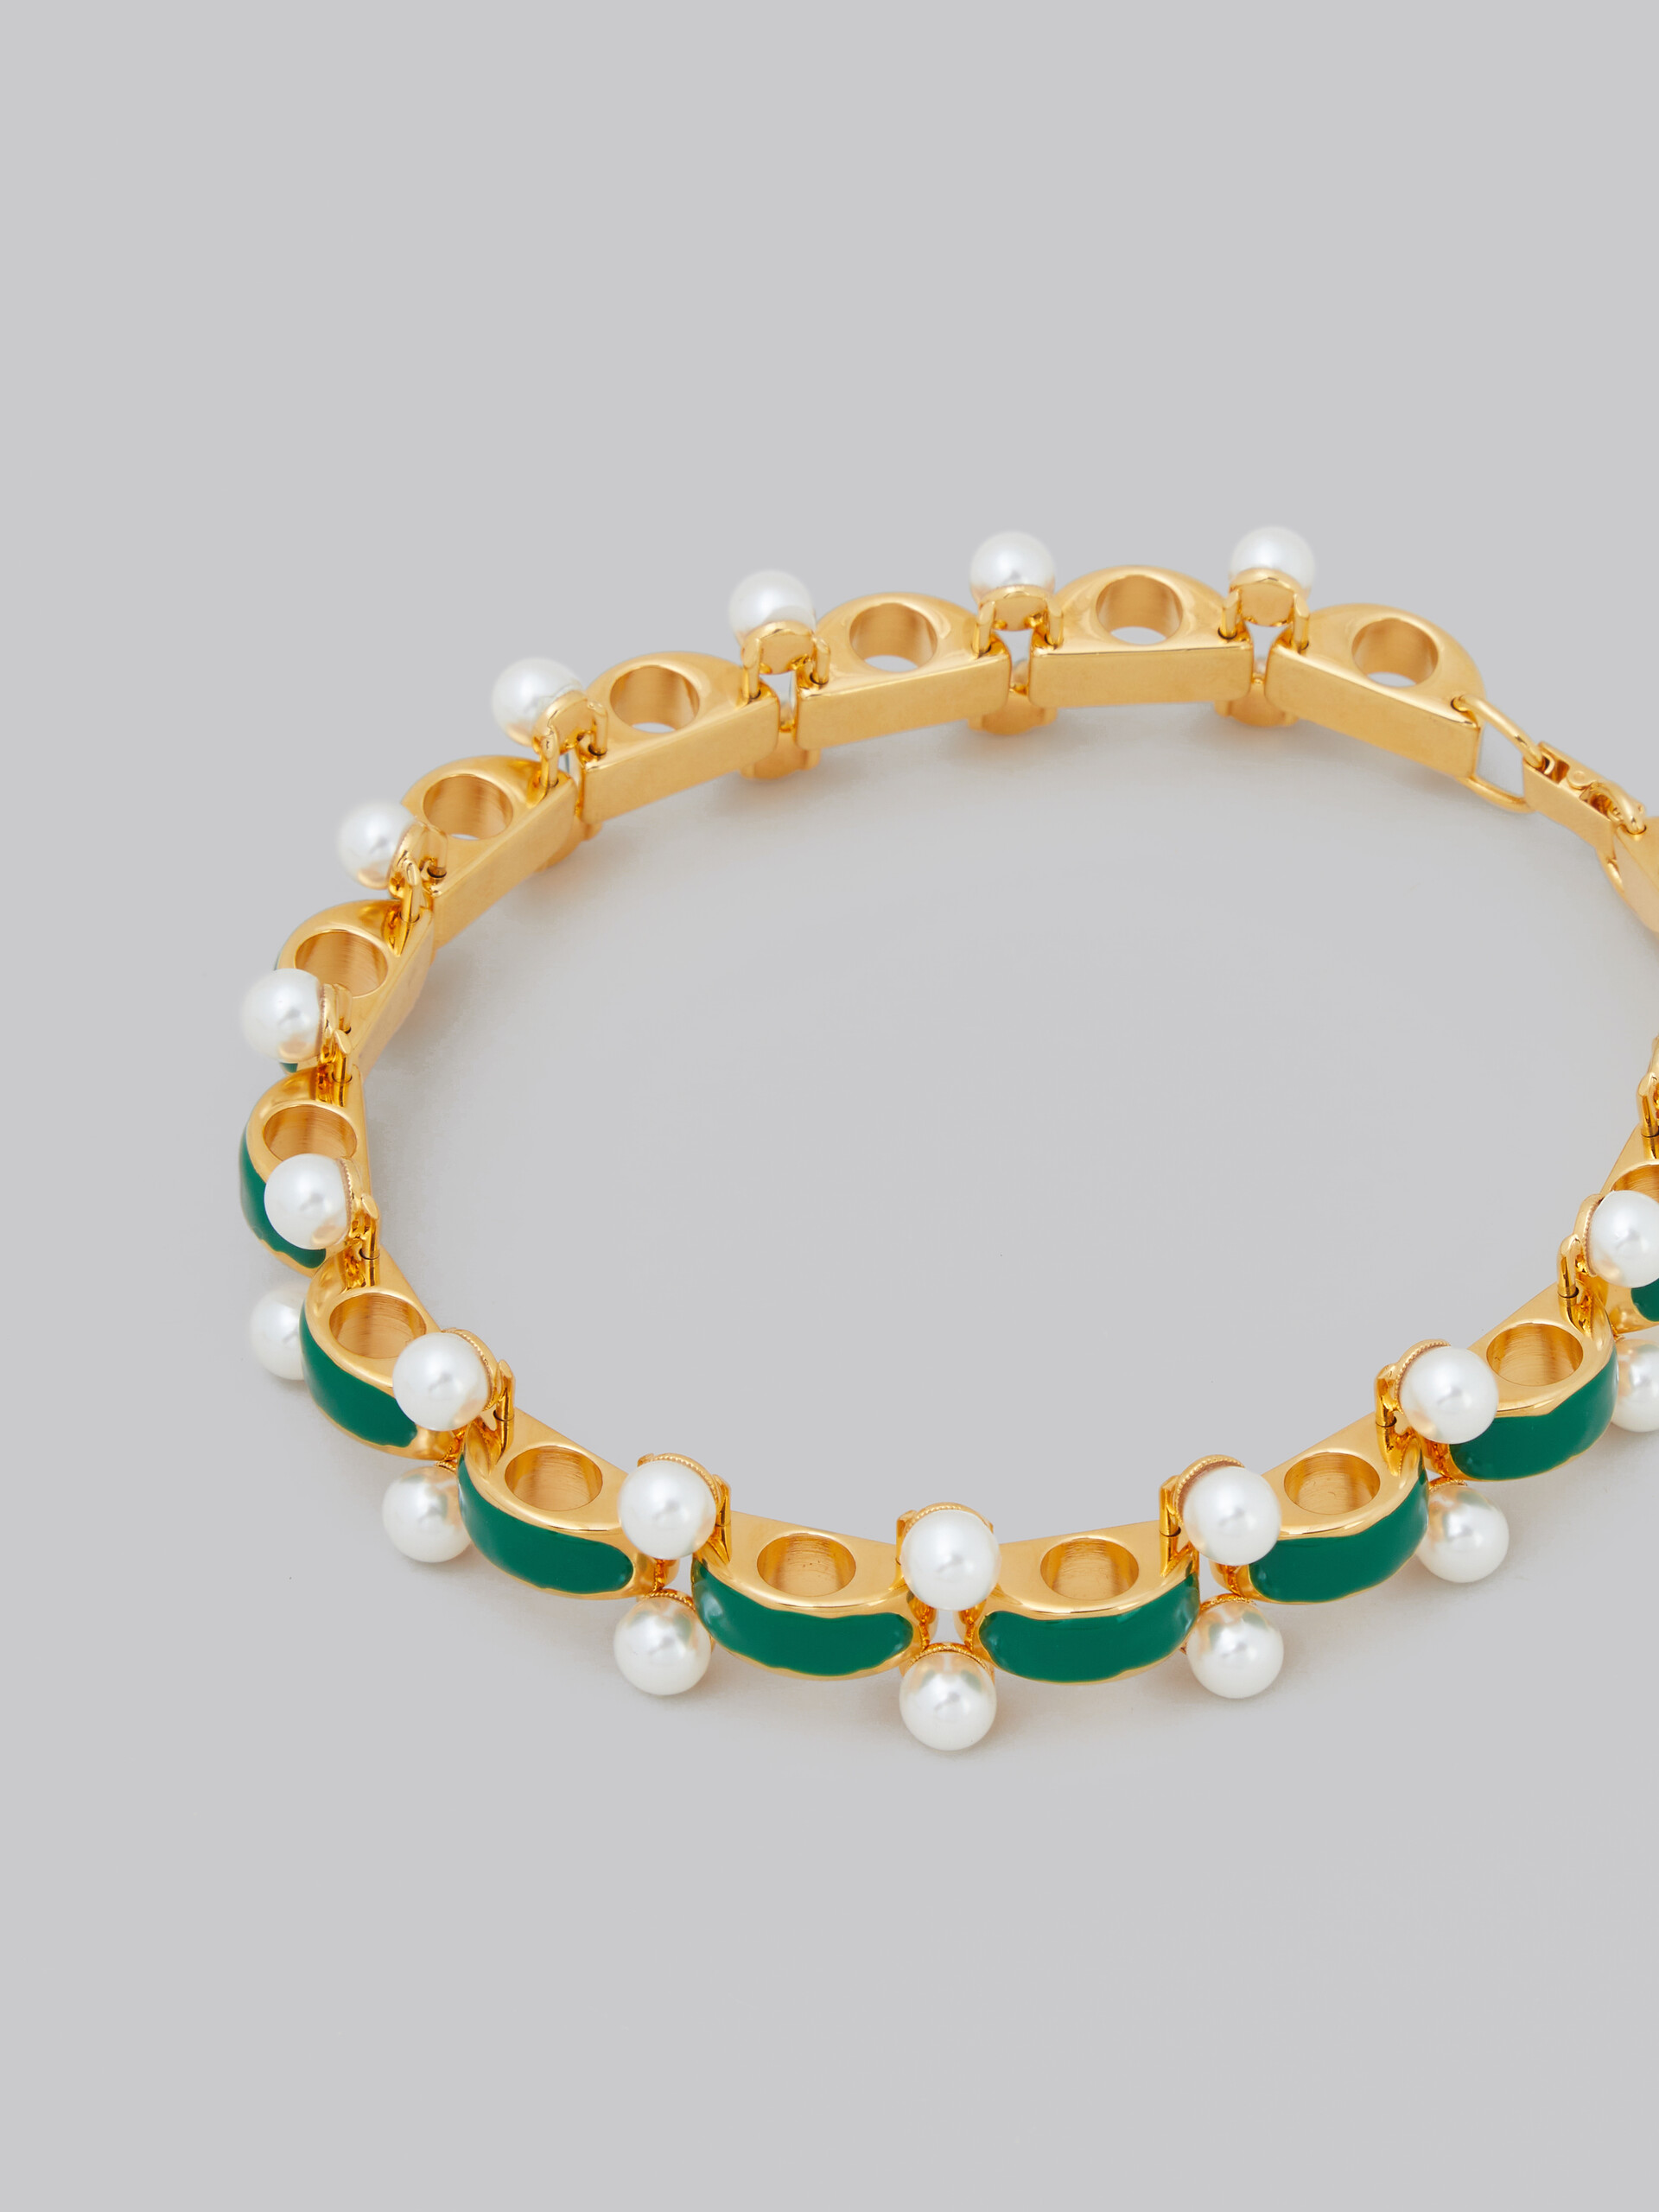 Scalloped choker with pearl details - Necklaces - Image 3